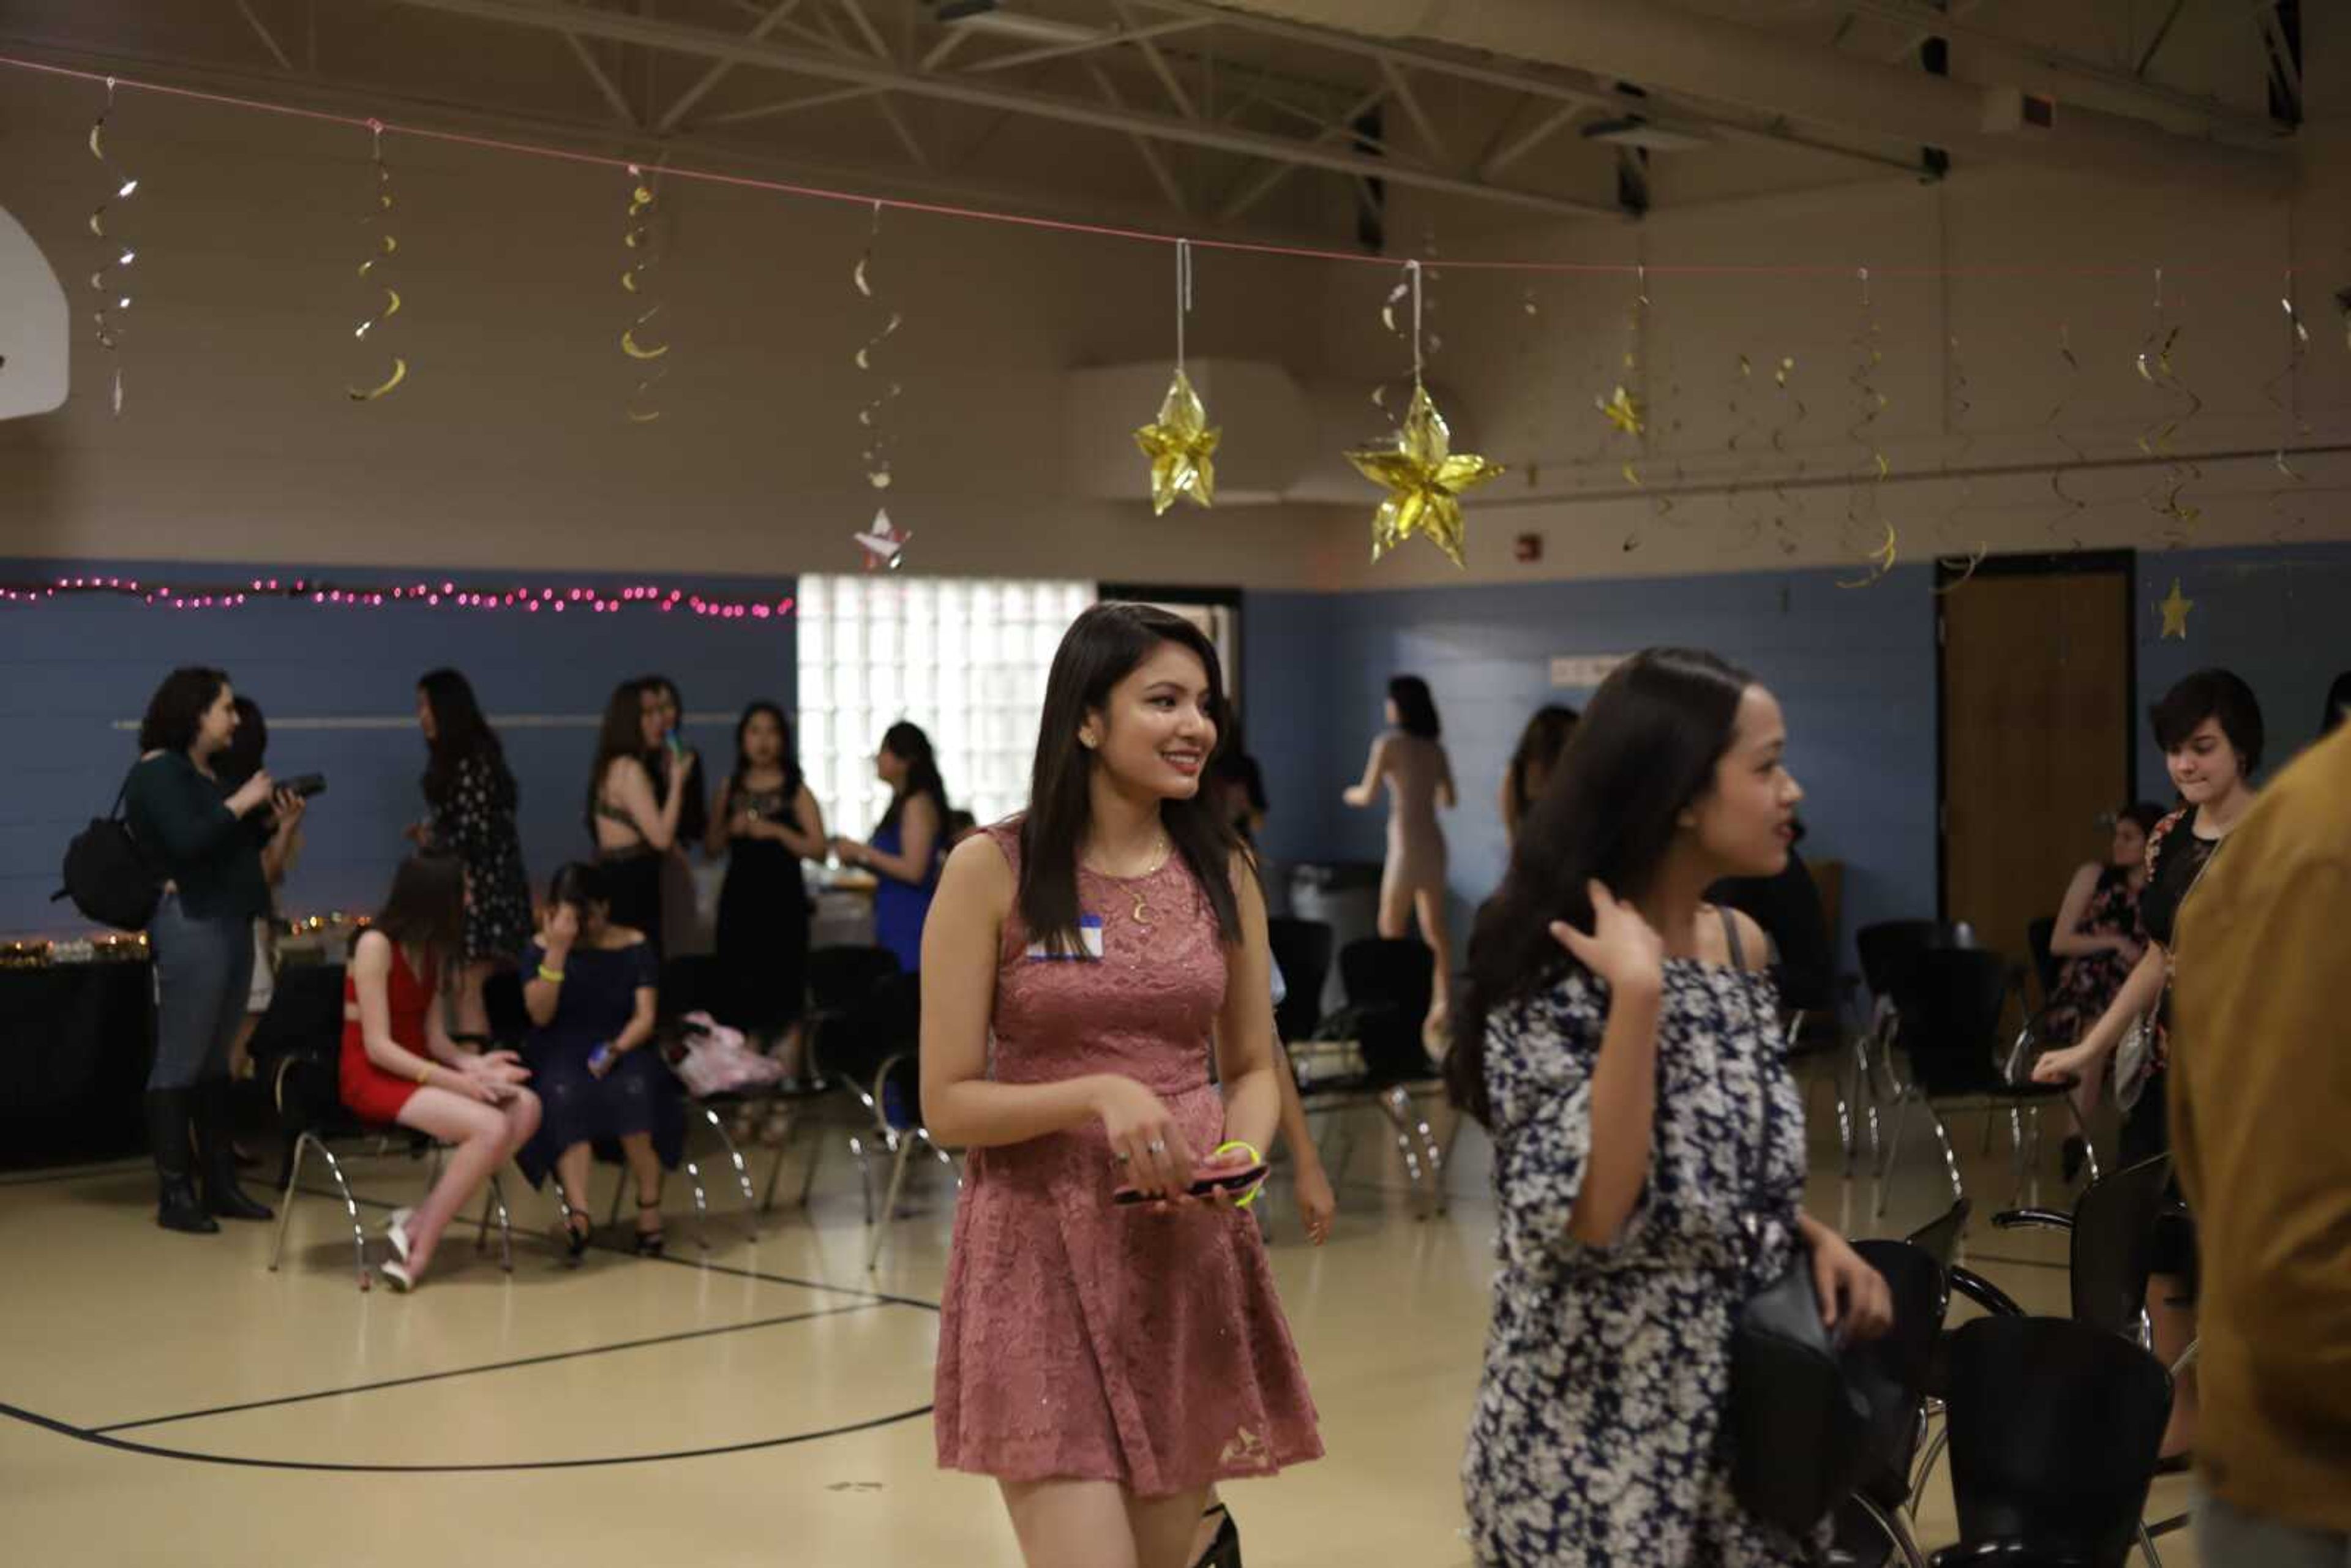 Students socializing at annual ISA Prom held in the International Village for the first time, March 22.